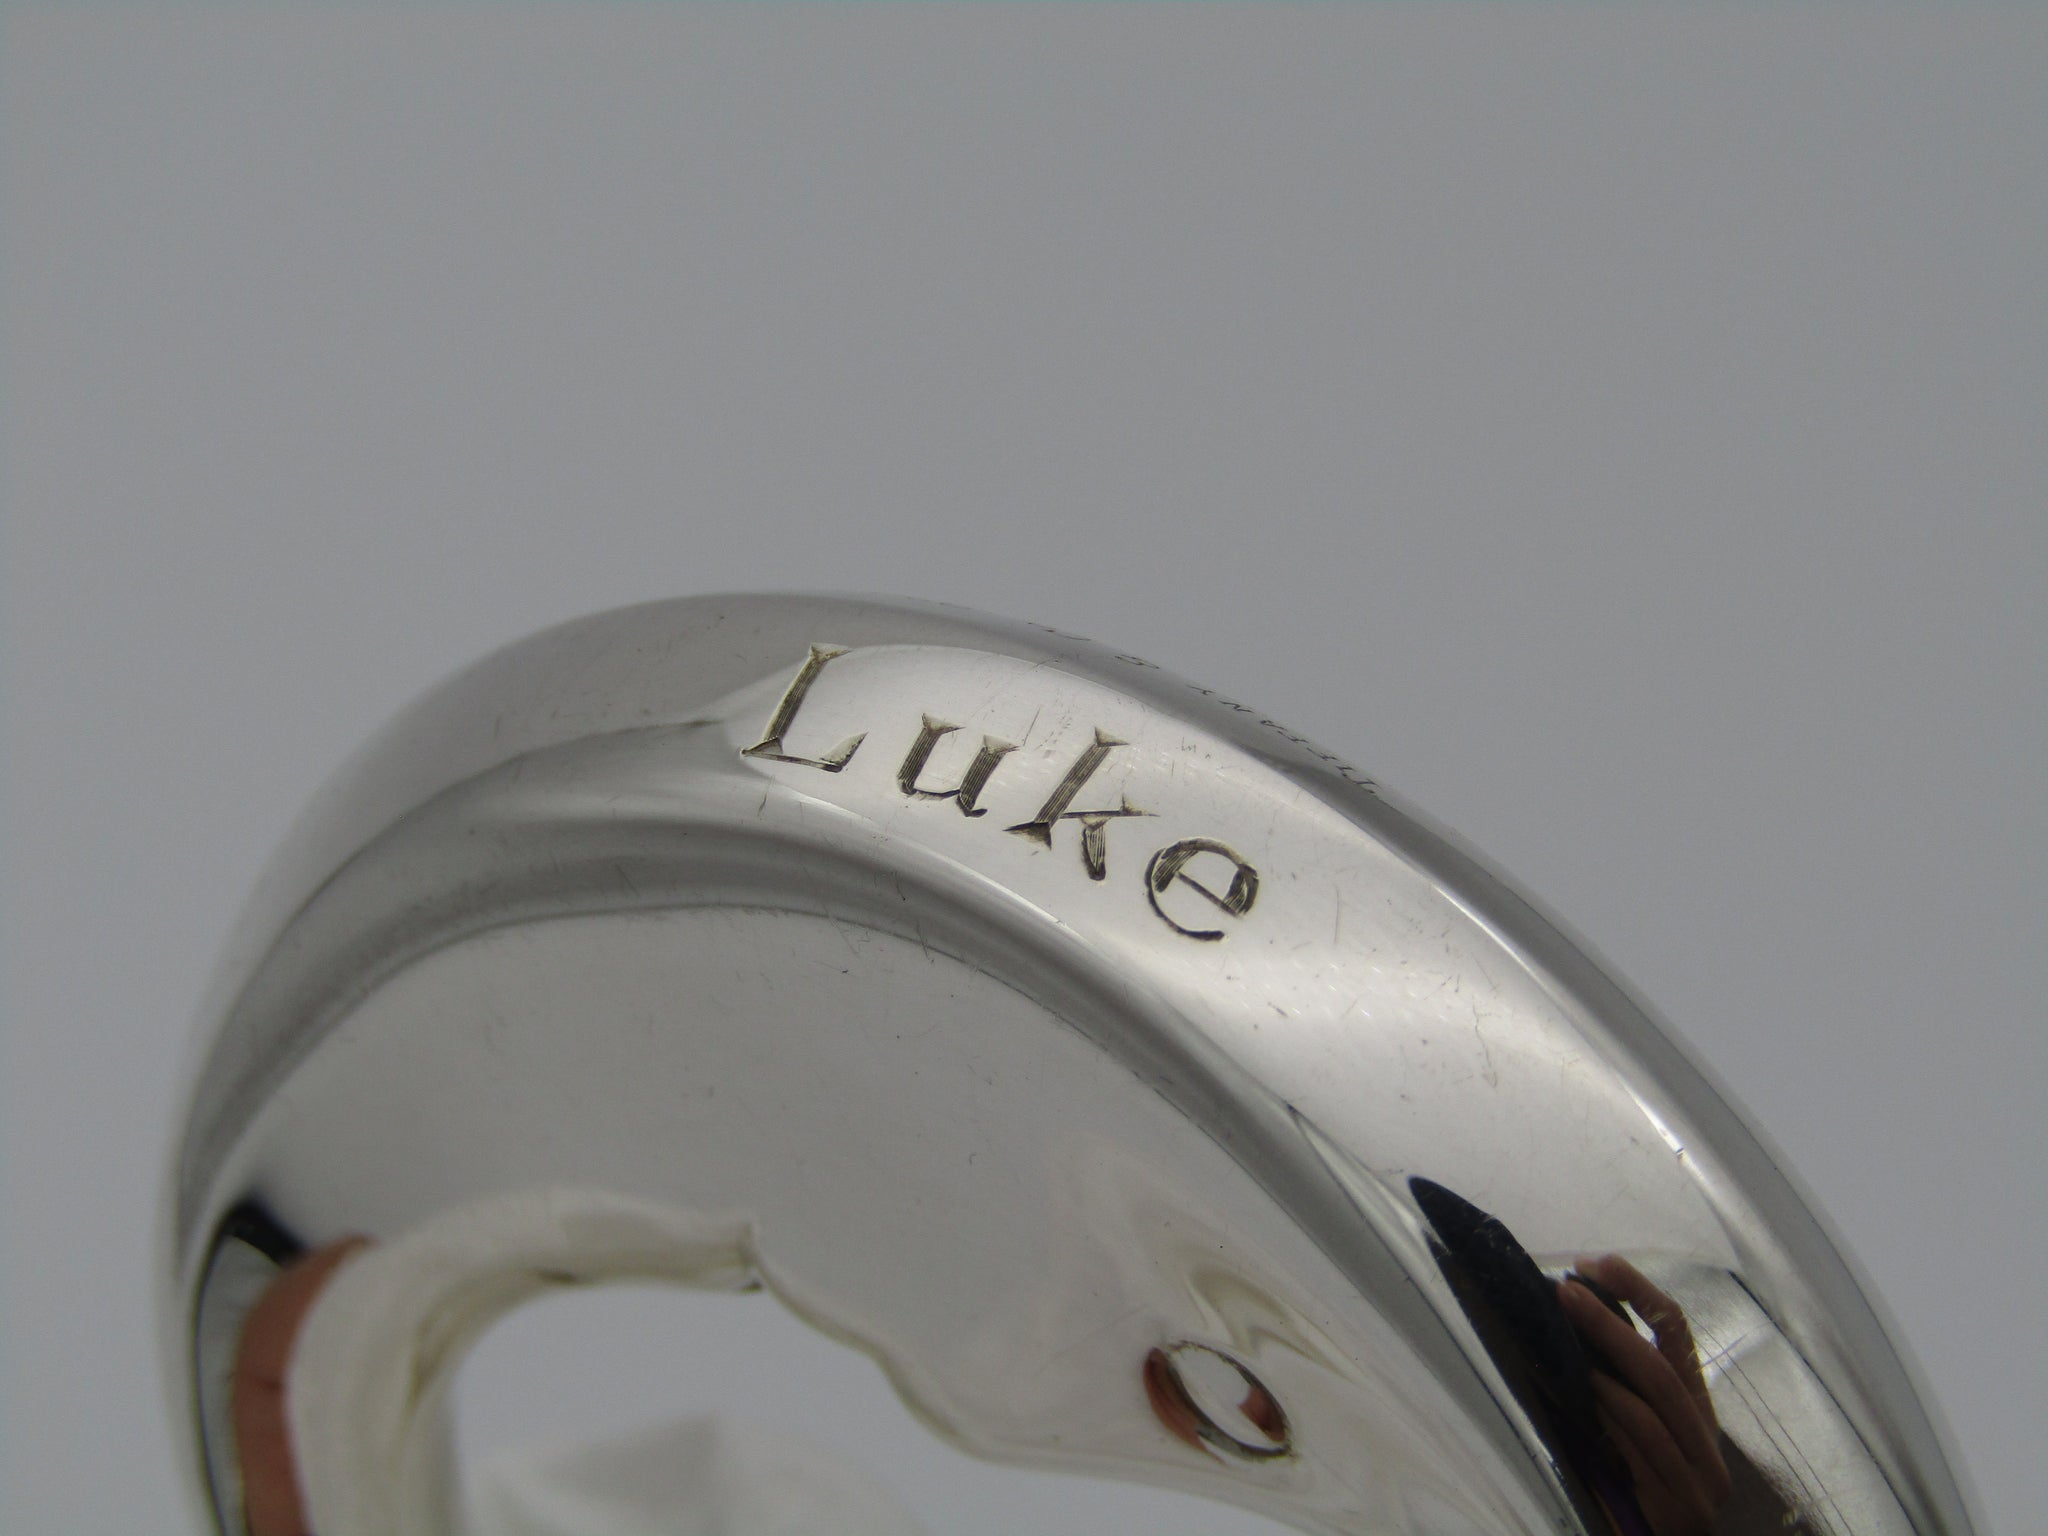 Tiffany & Co. sterling silver "Man in the moon" baby rattle. With the name "Luke" engraved on the rim.